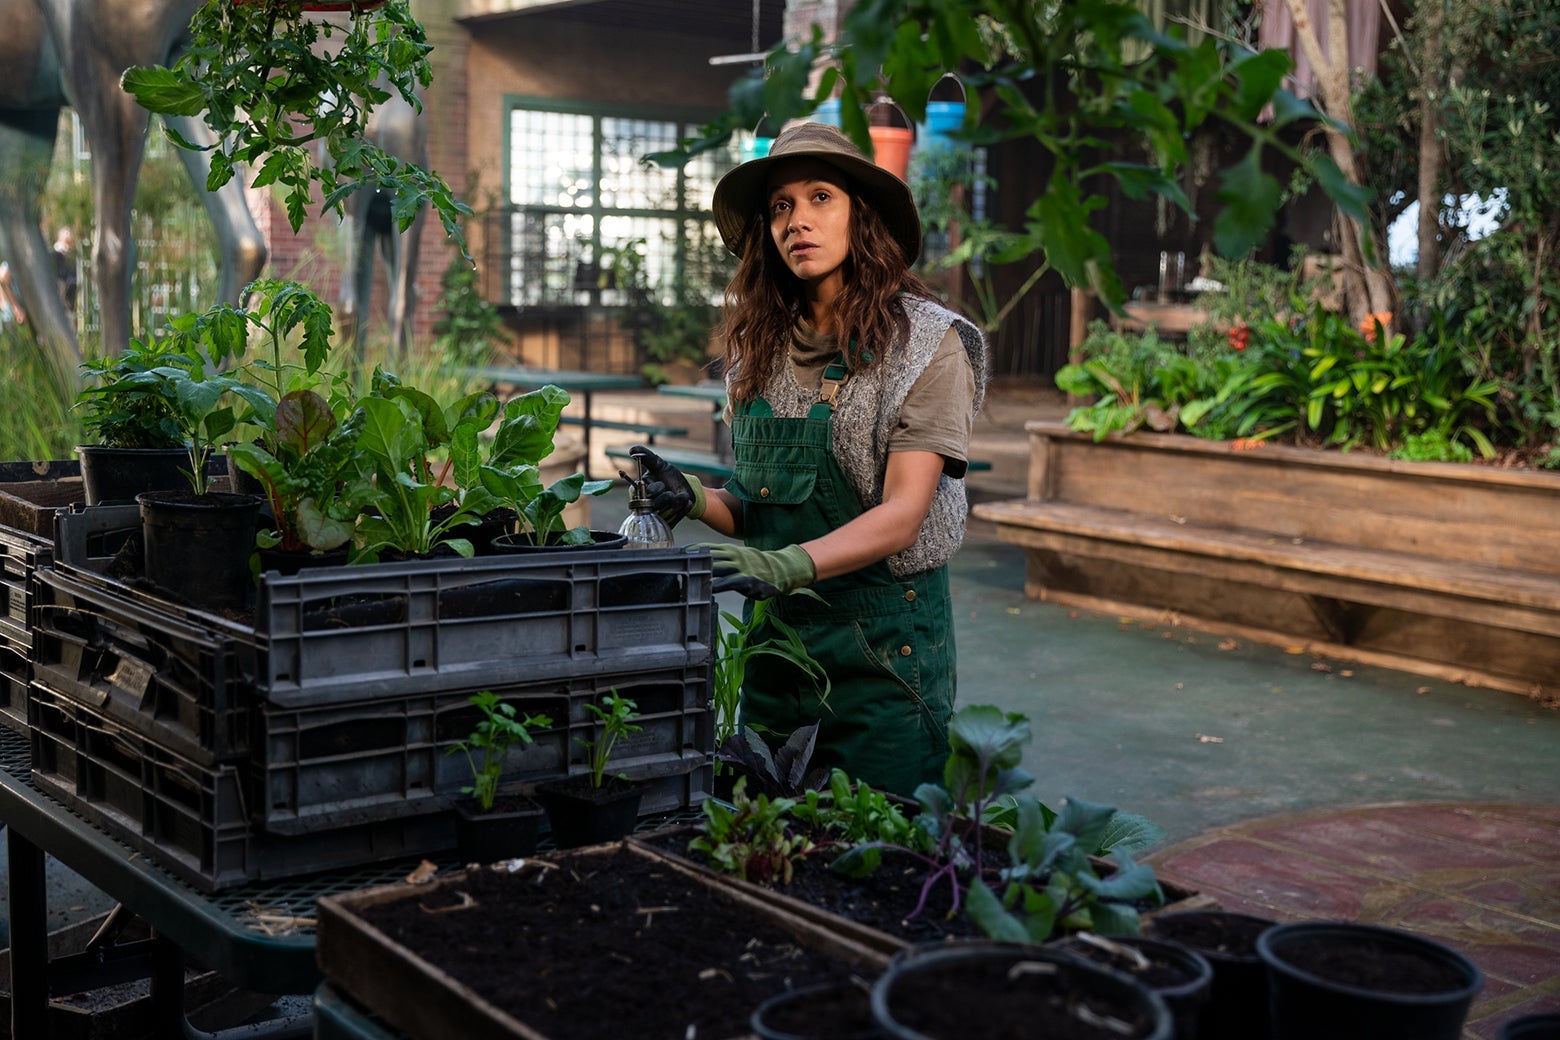 Actress Dania Ramirez, wearing a floppy hat and gardening apron, tends to some seedlings in a still from Sweet Tooth.